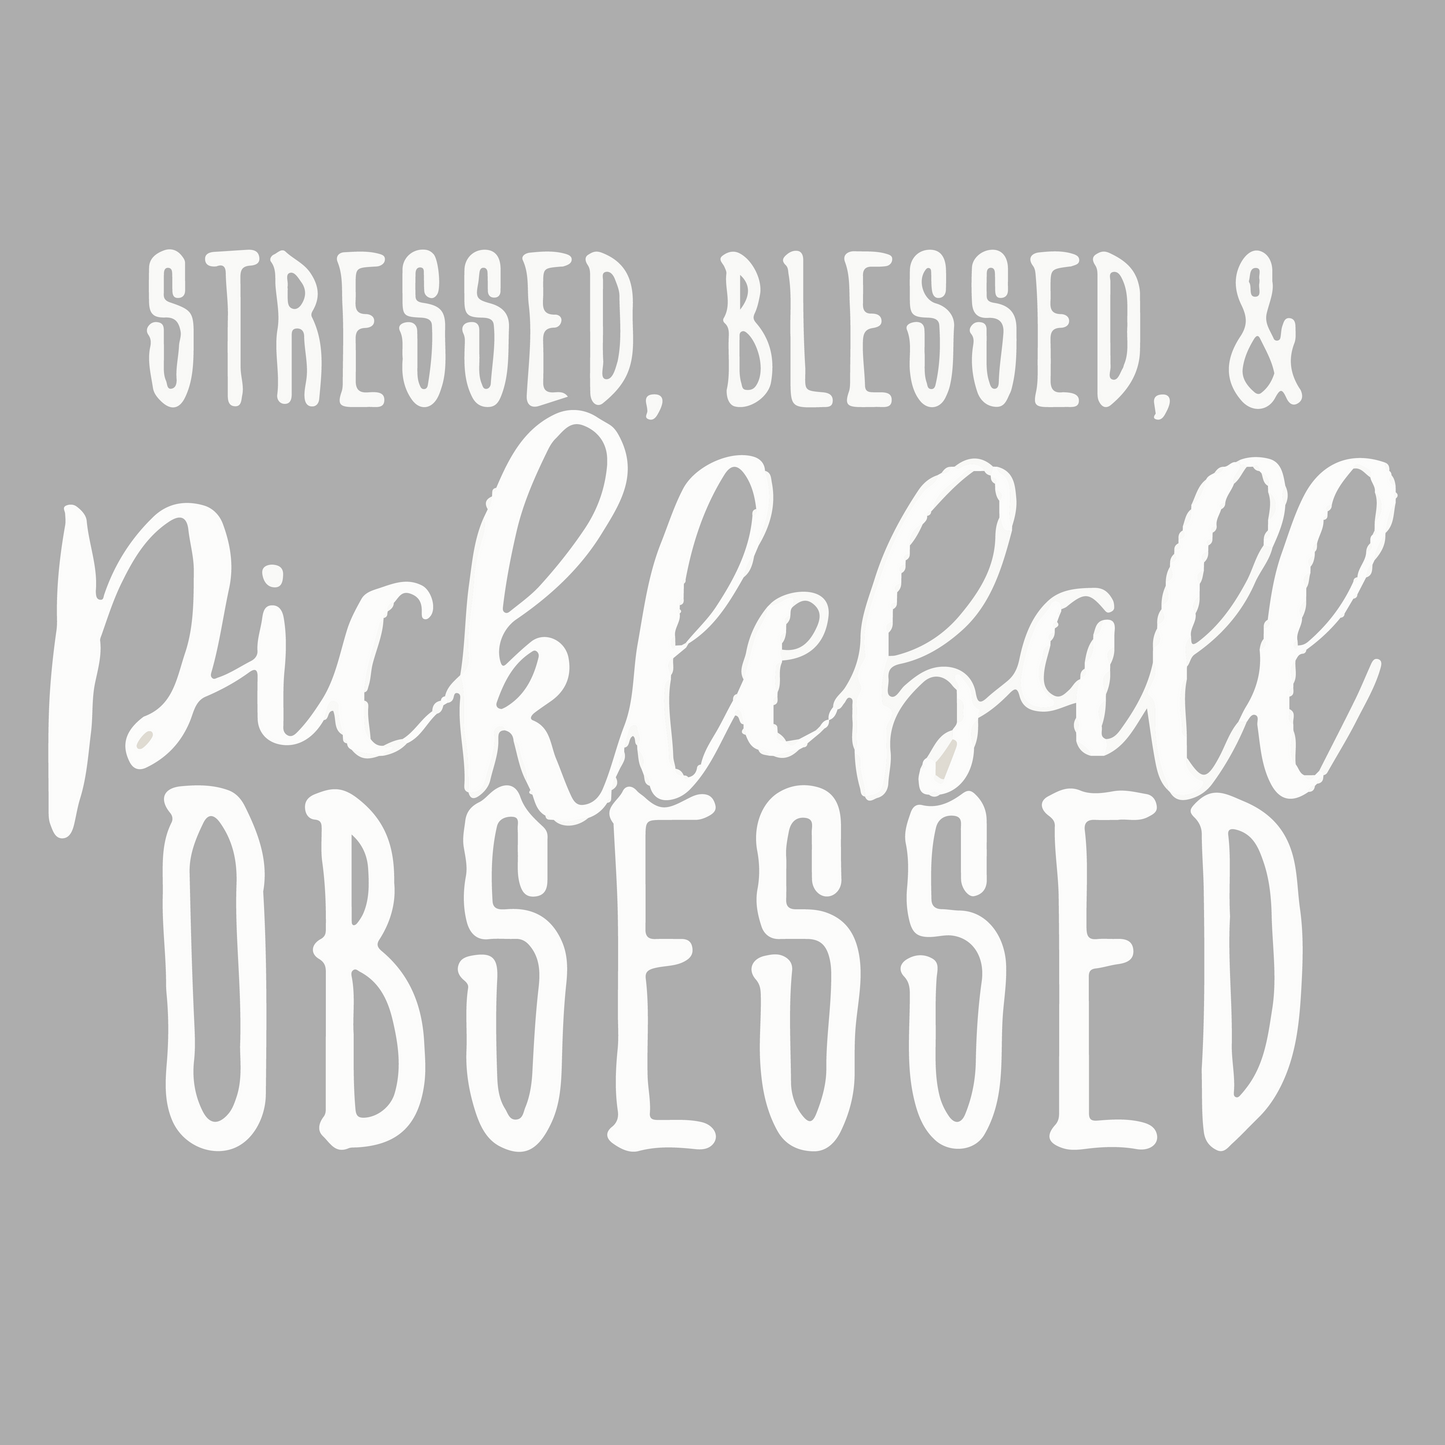 Stressed Blessed & Pickleball Obsessed | Men's Long Sleeve Athletic Shirt | 100% Polyester